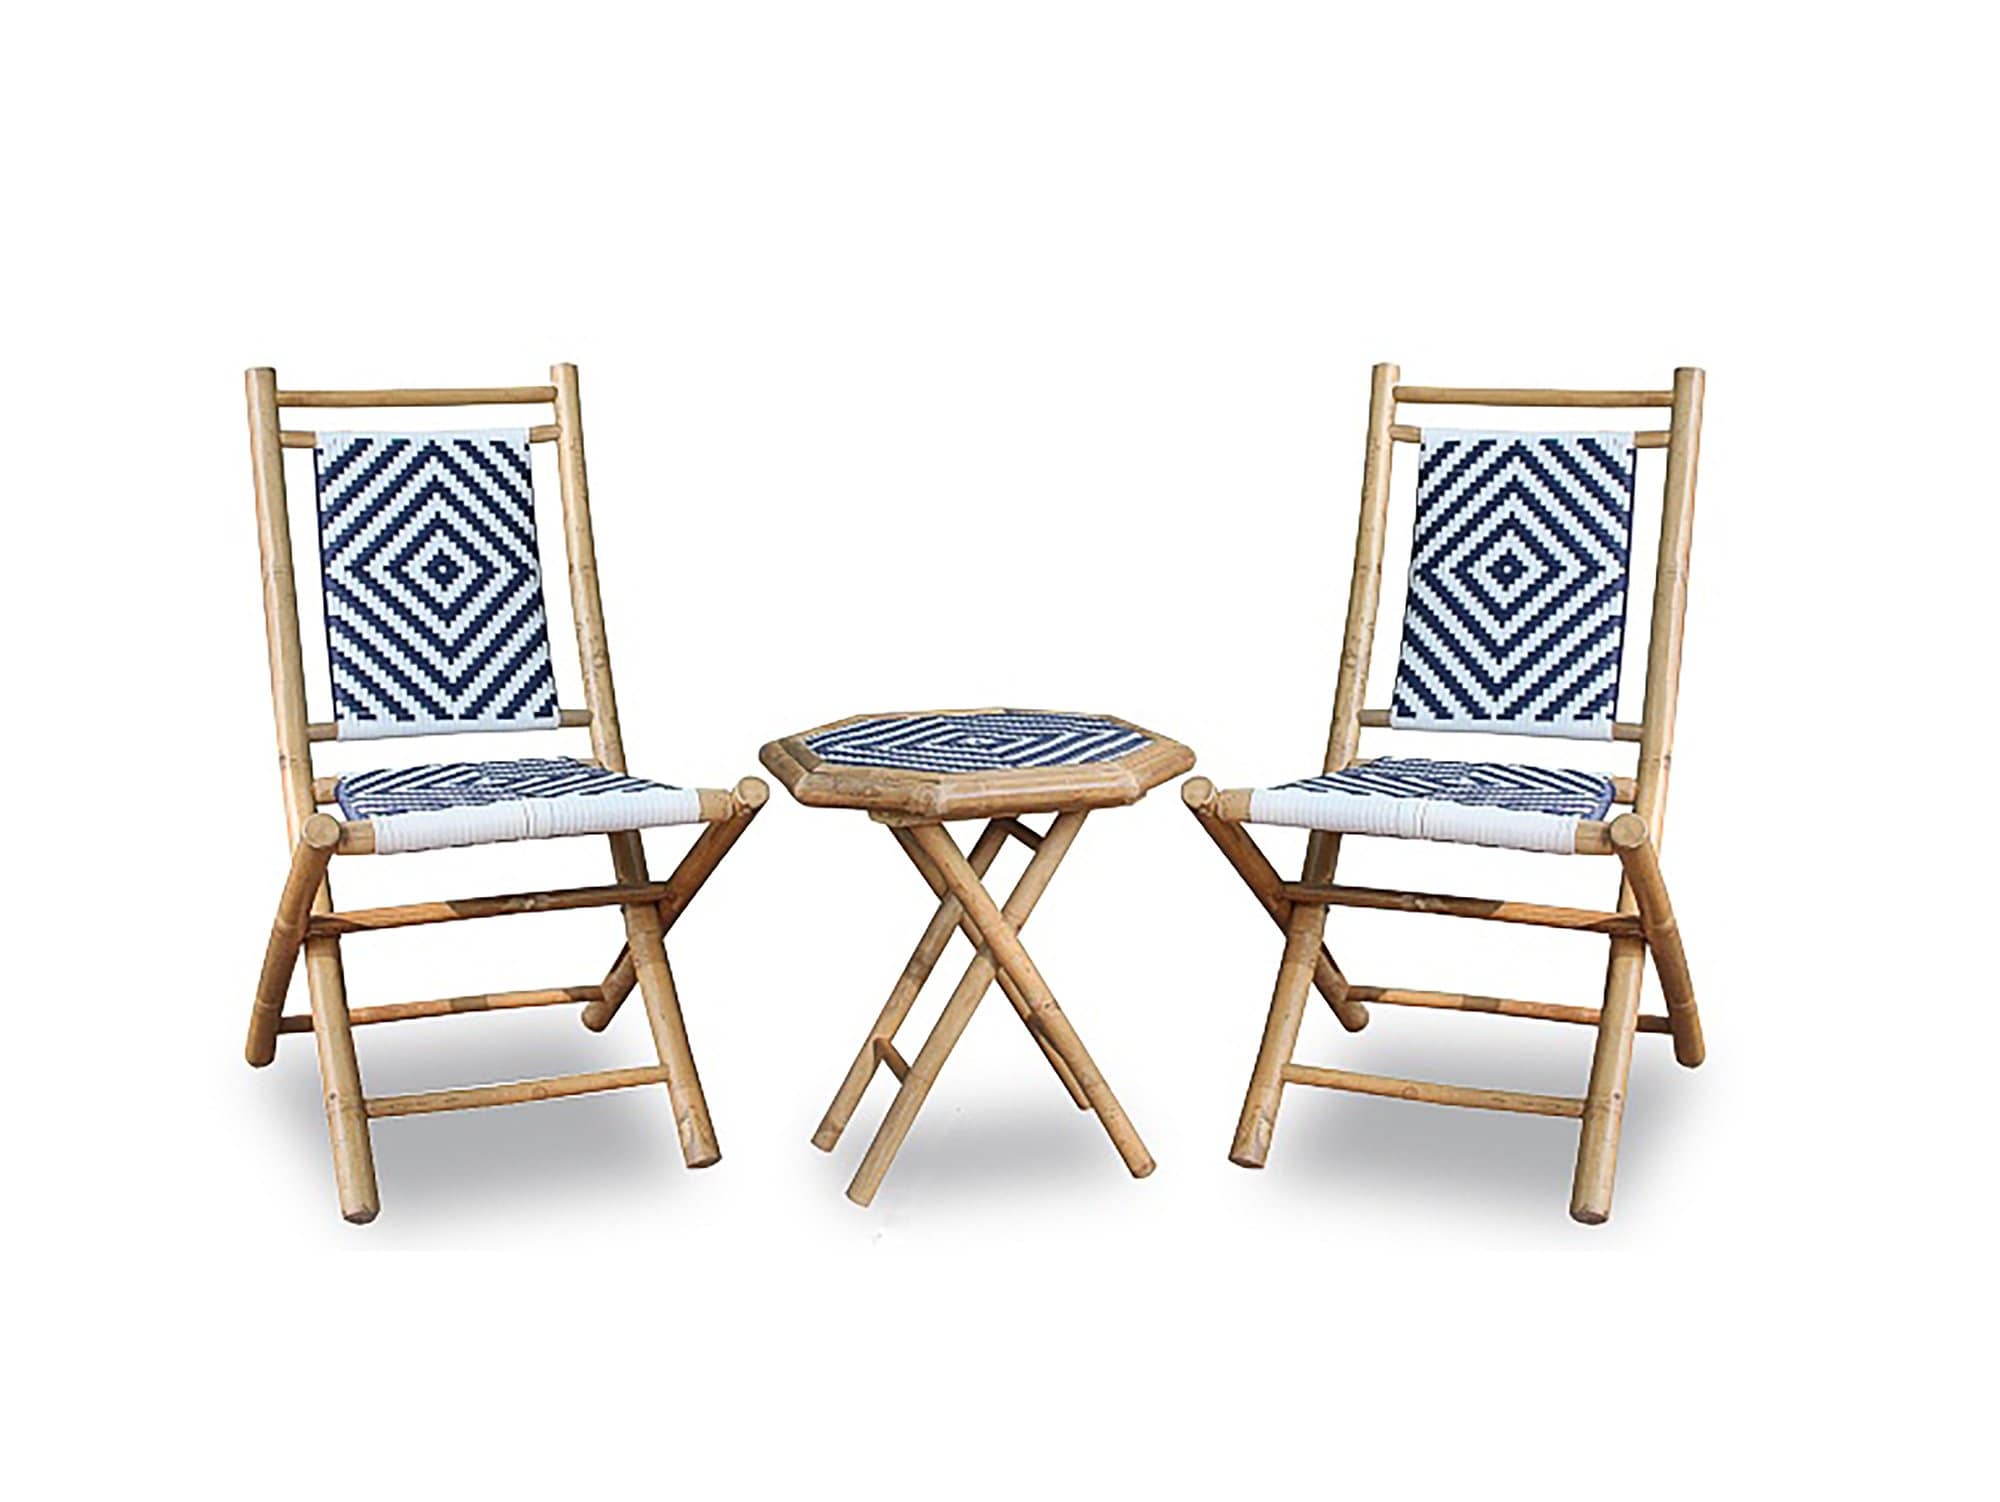 HomeRoots Outdoors Outdoor Furniture > Outdoor Furniture Set Natural/Navy Blue & White / Bamboo 21" Navy Blue and White Outdoor Conversation Set of 2 Chairs and a Table